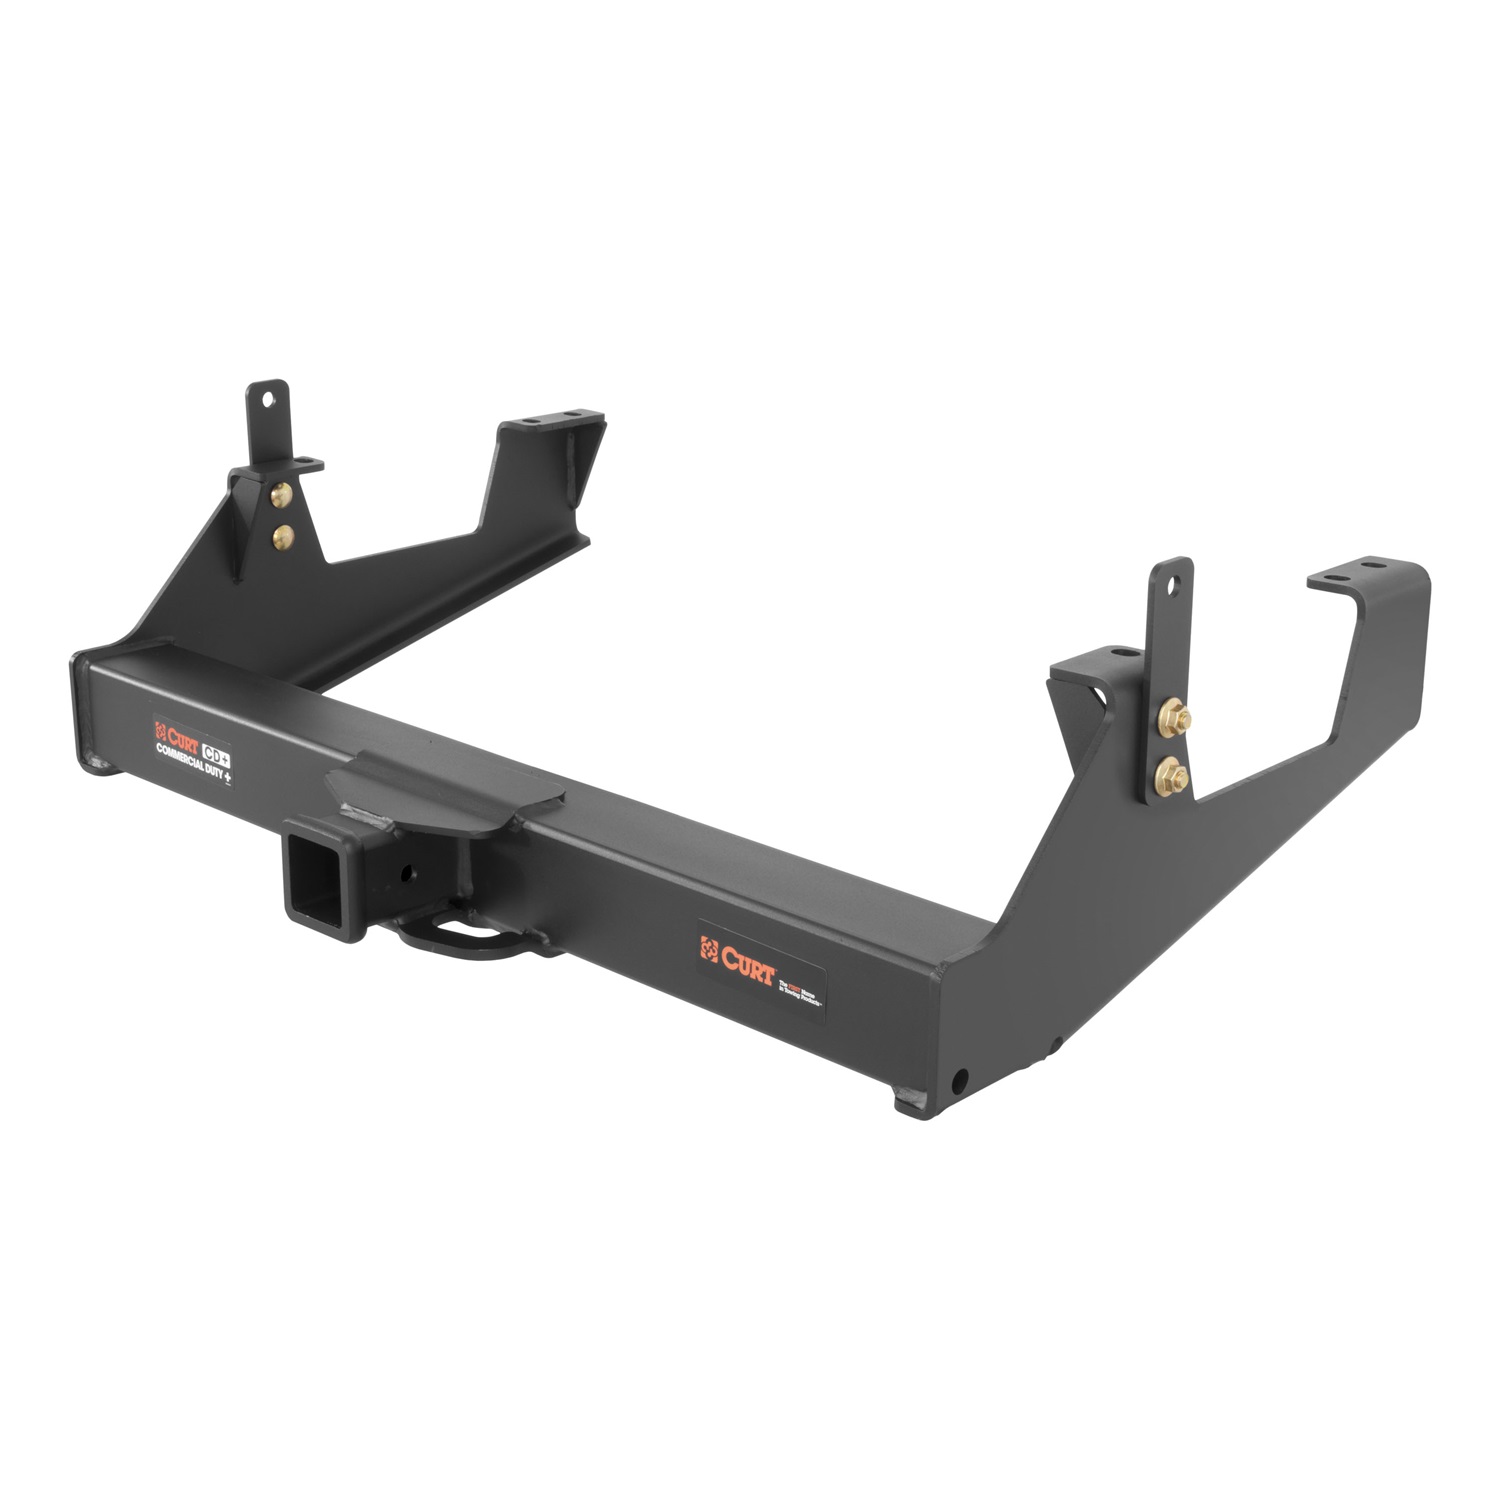 CURT Manufacturing CURT Manufacturing 15860 Class V; 2.5 in. Commercial Duty Hitch